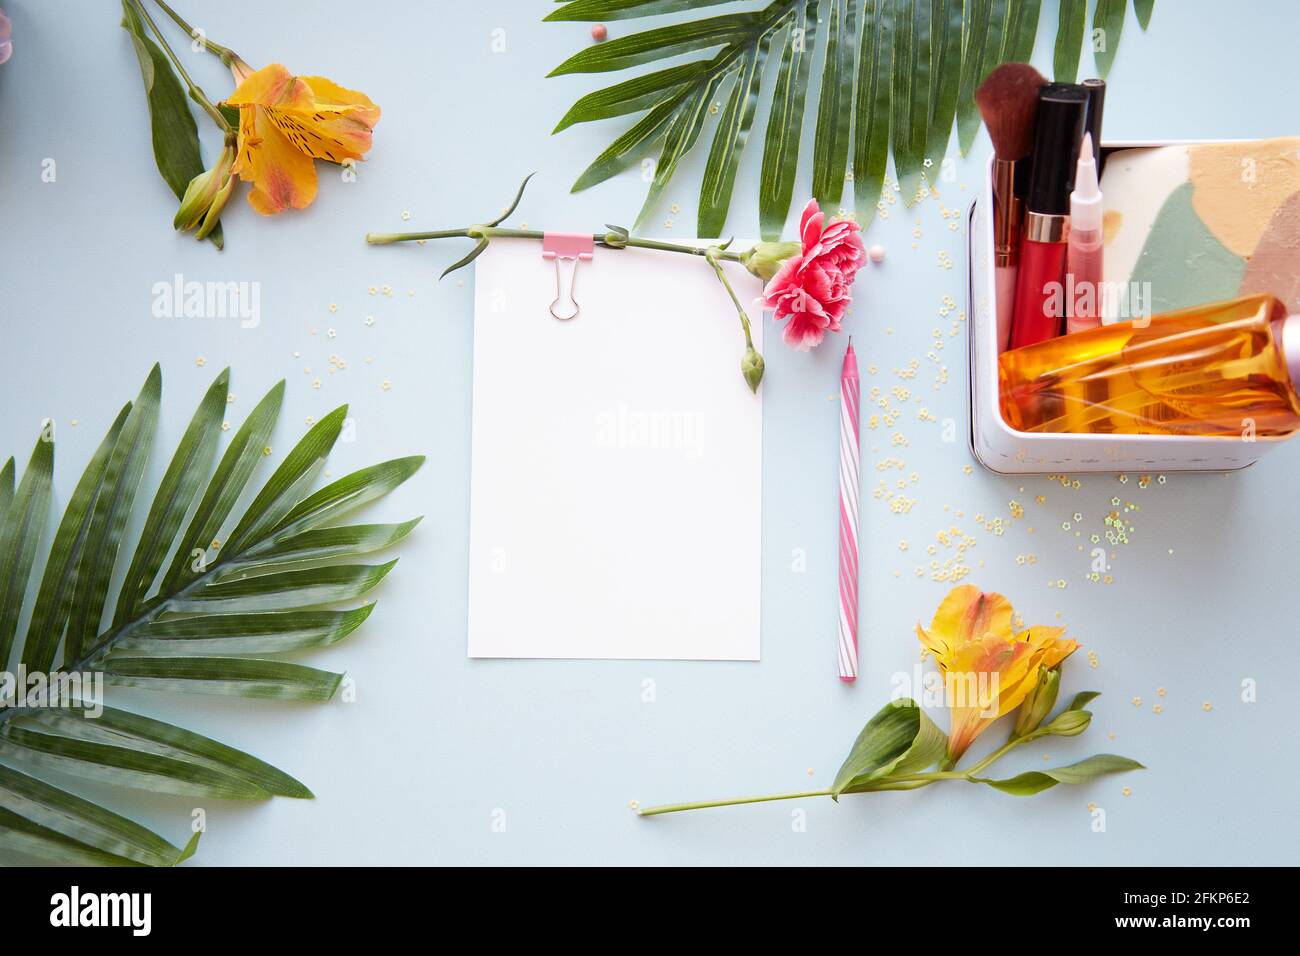 Summer beauty concept background with stationery card, pen, tropical leaves, cosmetic products and alstroemeria flowers. High quality photo Stock Photo